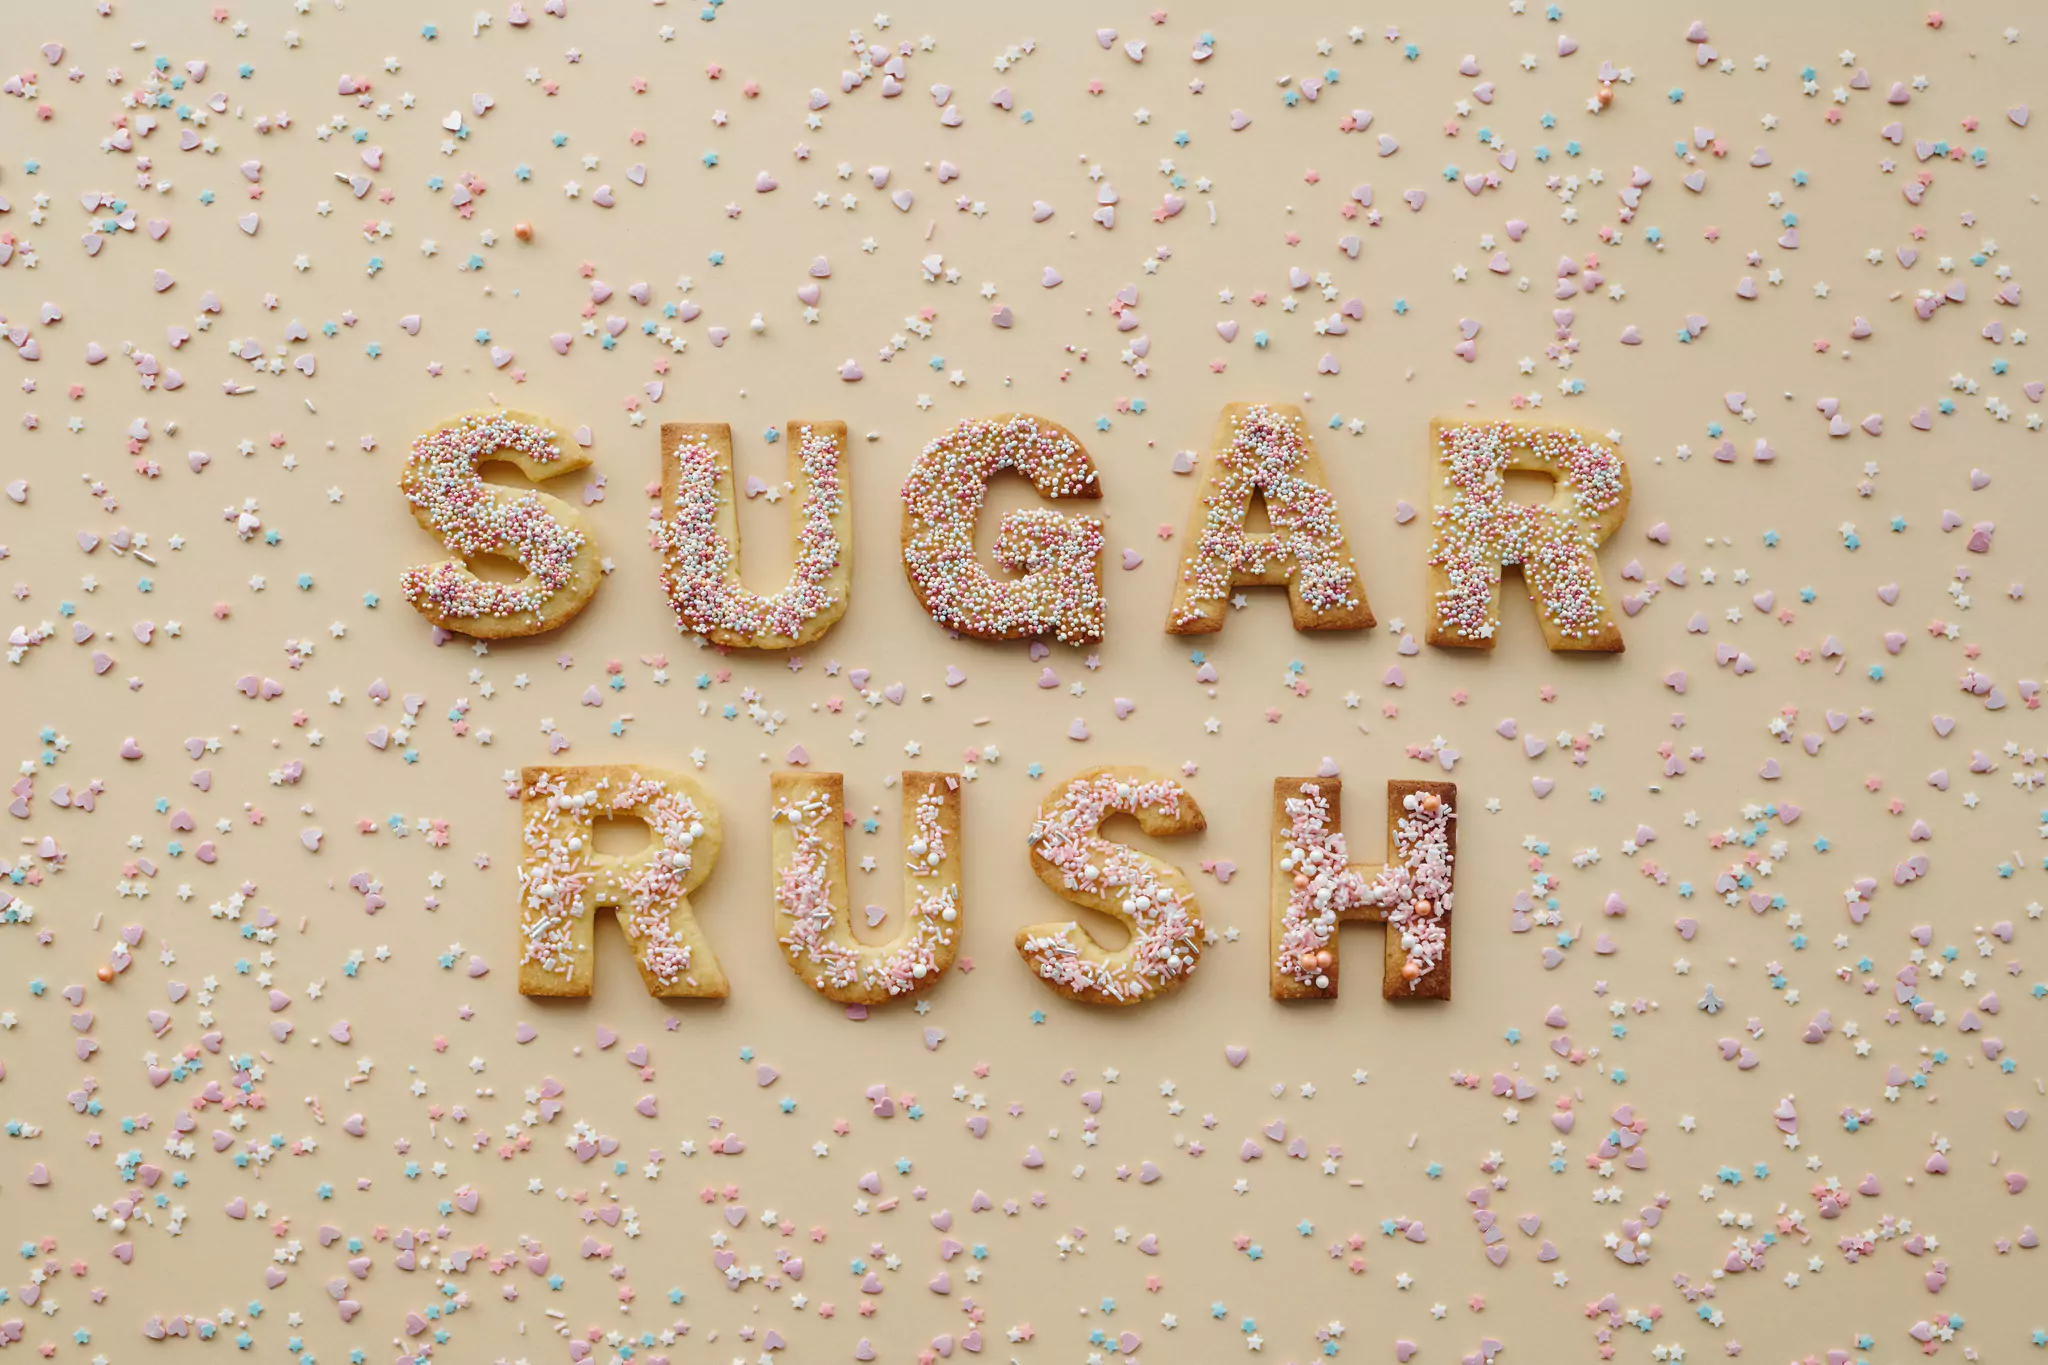 Baked treats that spell out 'Sugar Rush'.